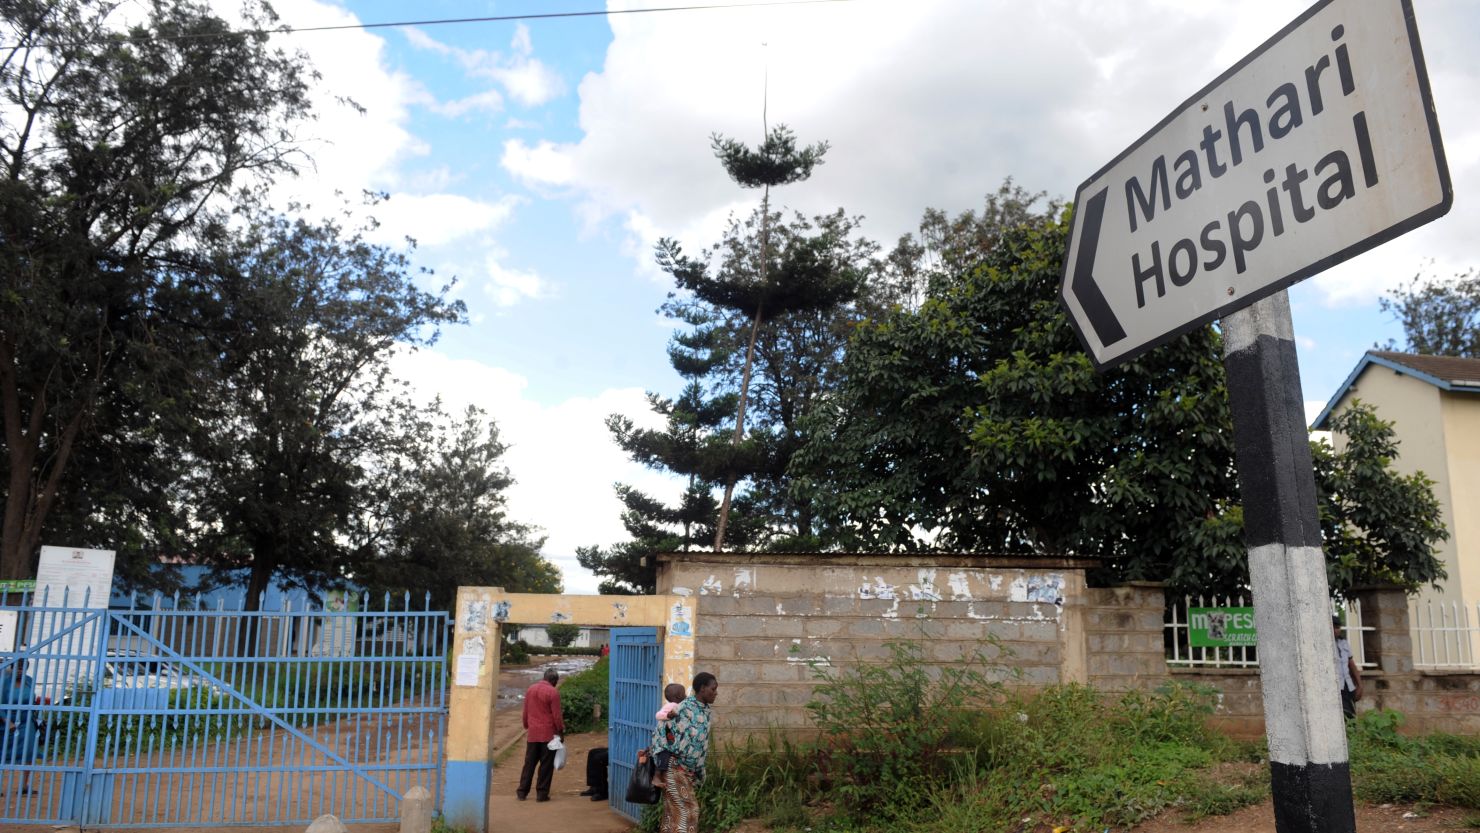 A woman carrying a baby walks past a sign showing the direction to the Mathari hospital on May 13, 2013 in Nairobi. 